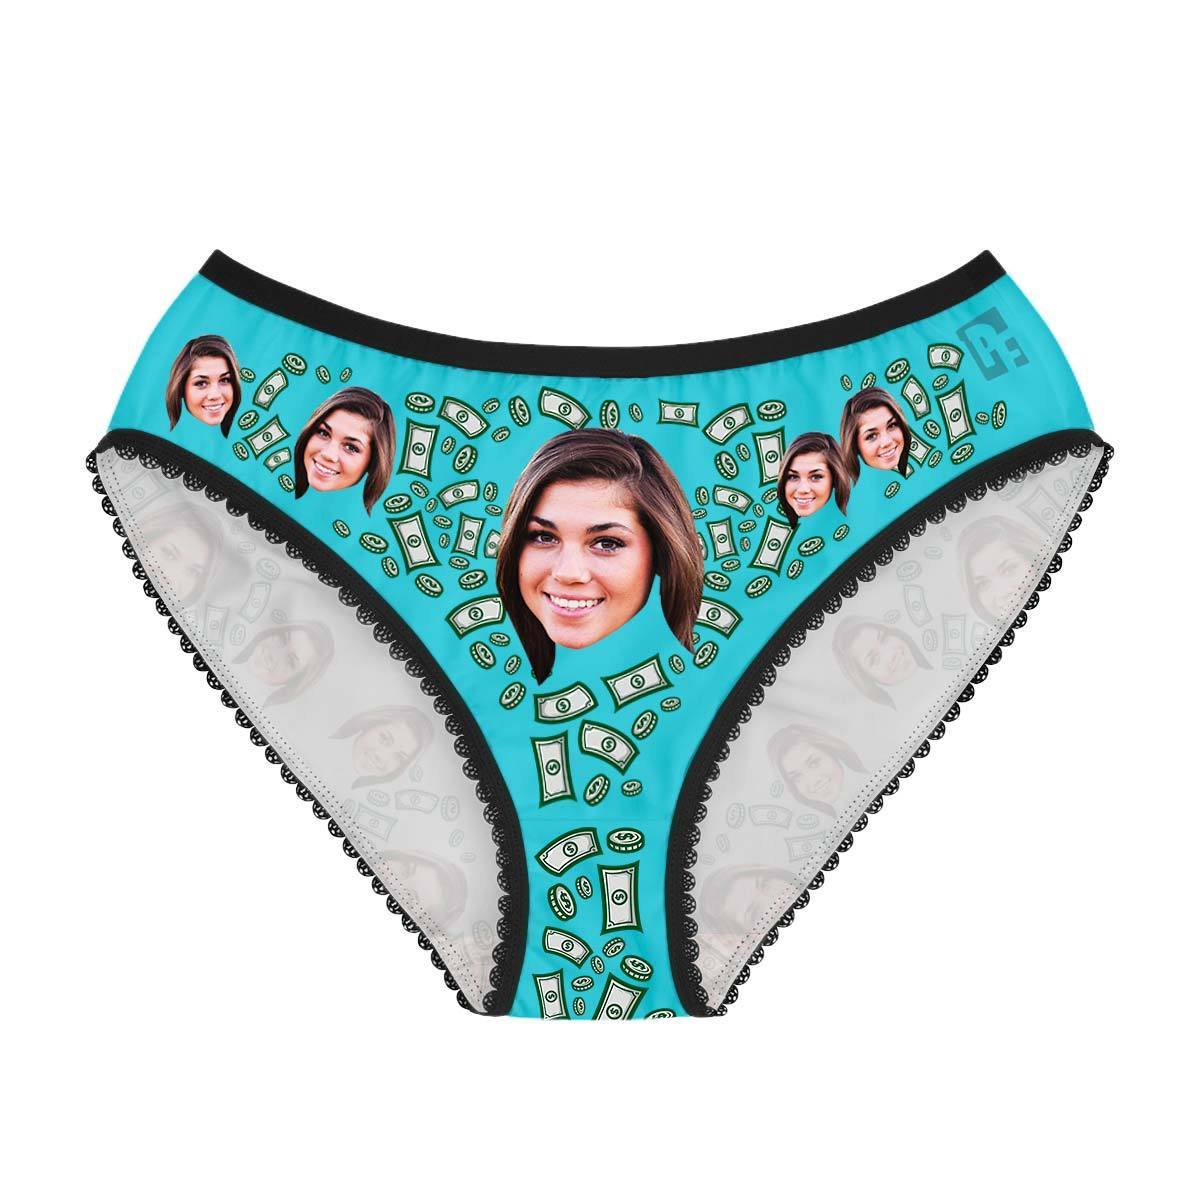 Blue Money women's underwear briefs personalized with photo printed on them